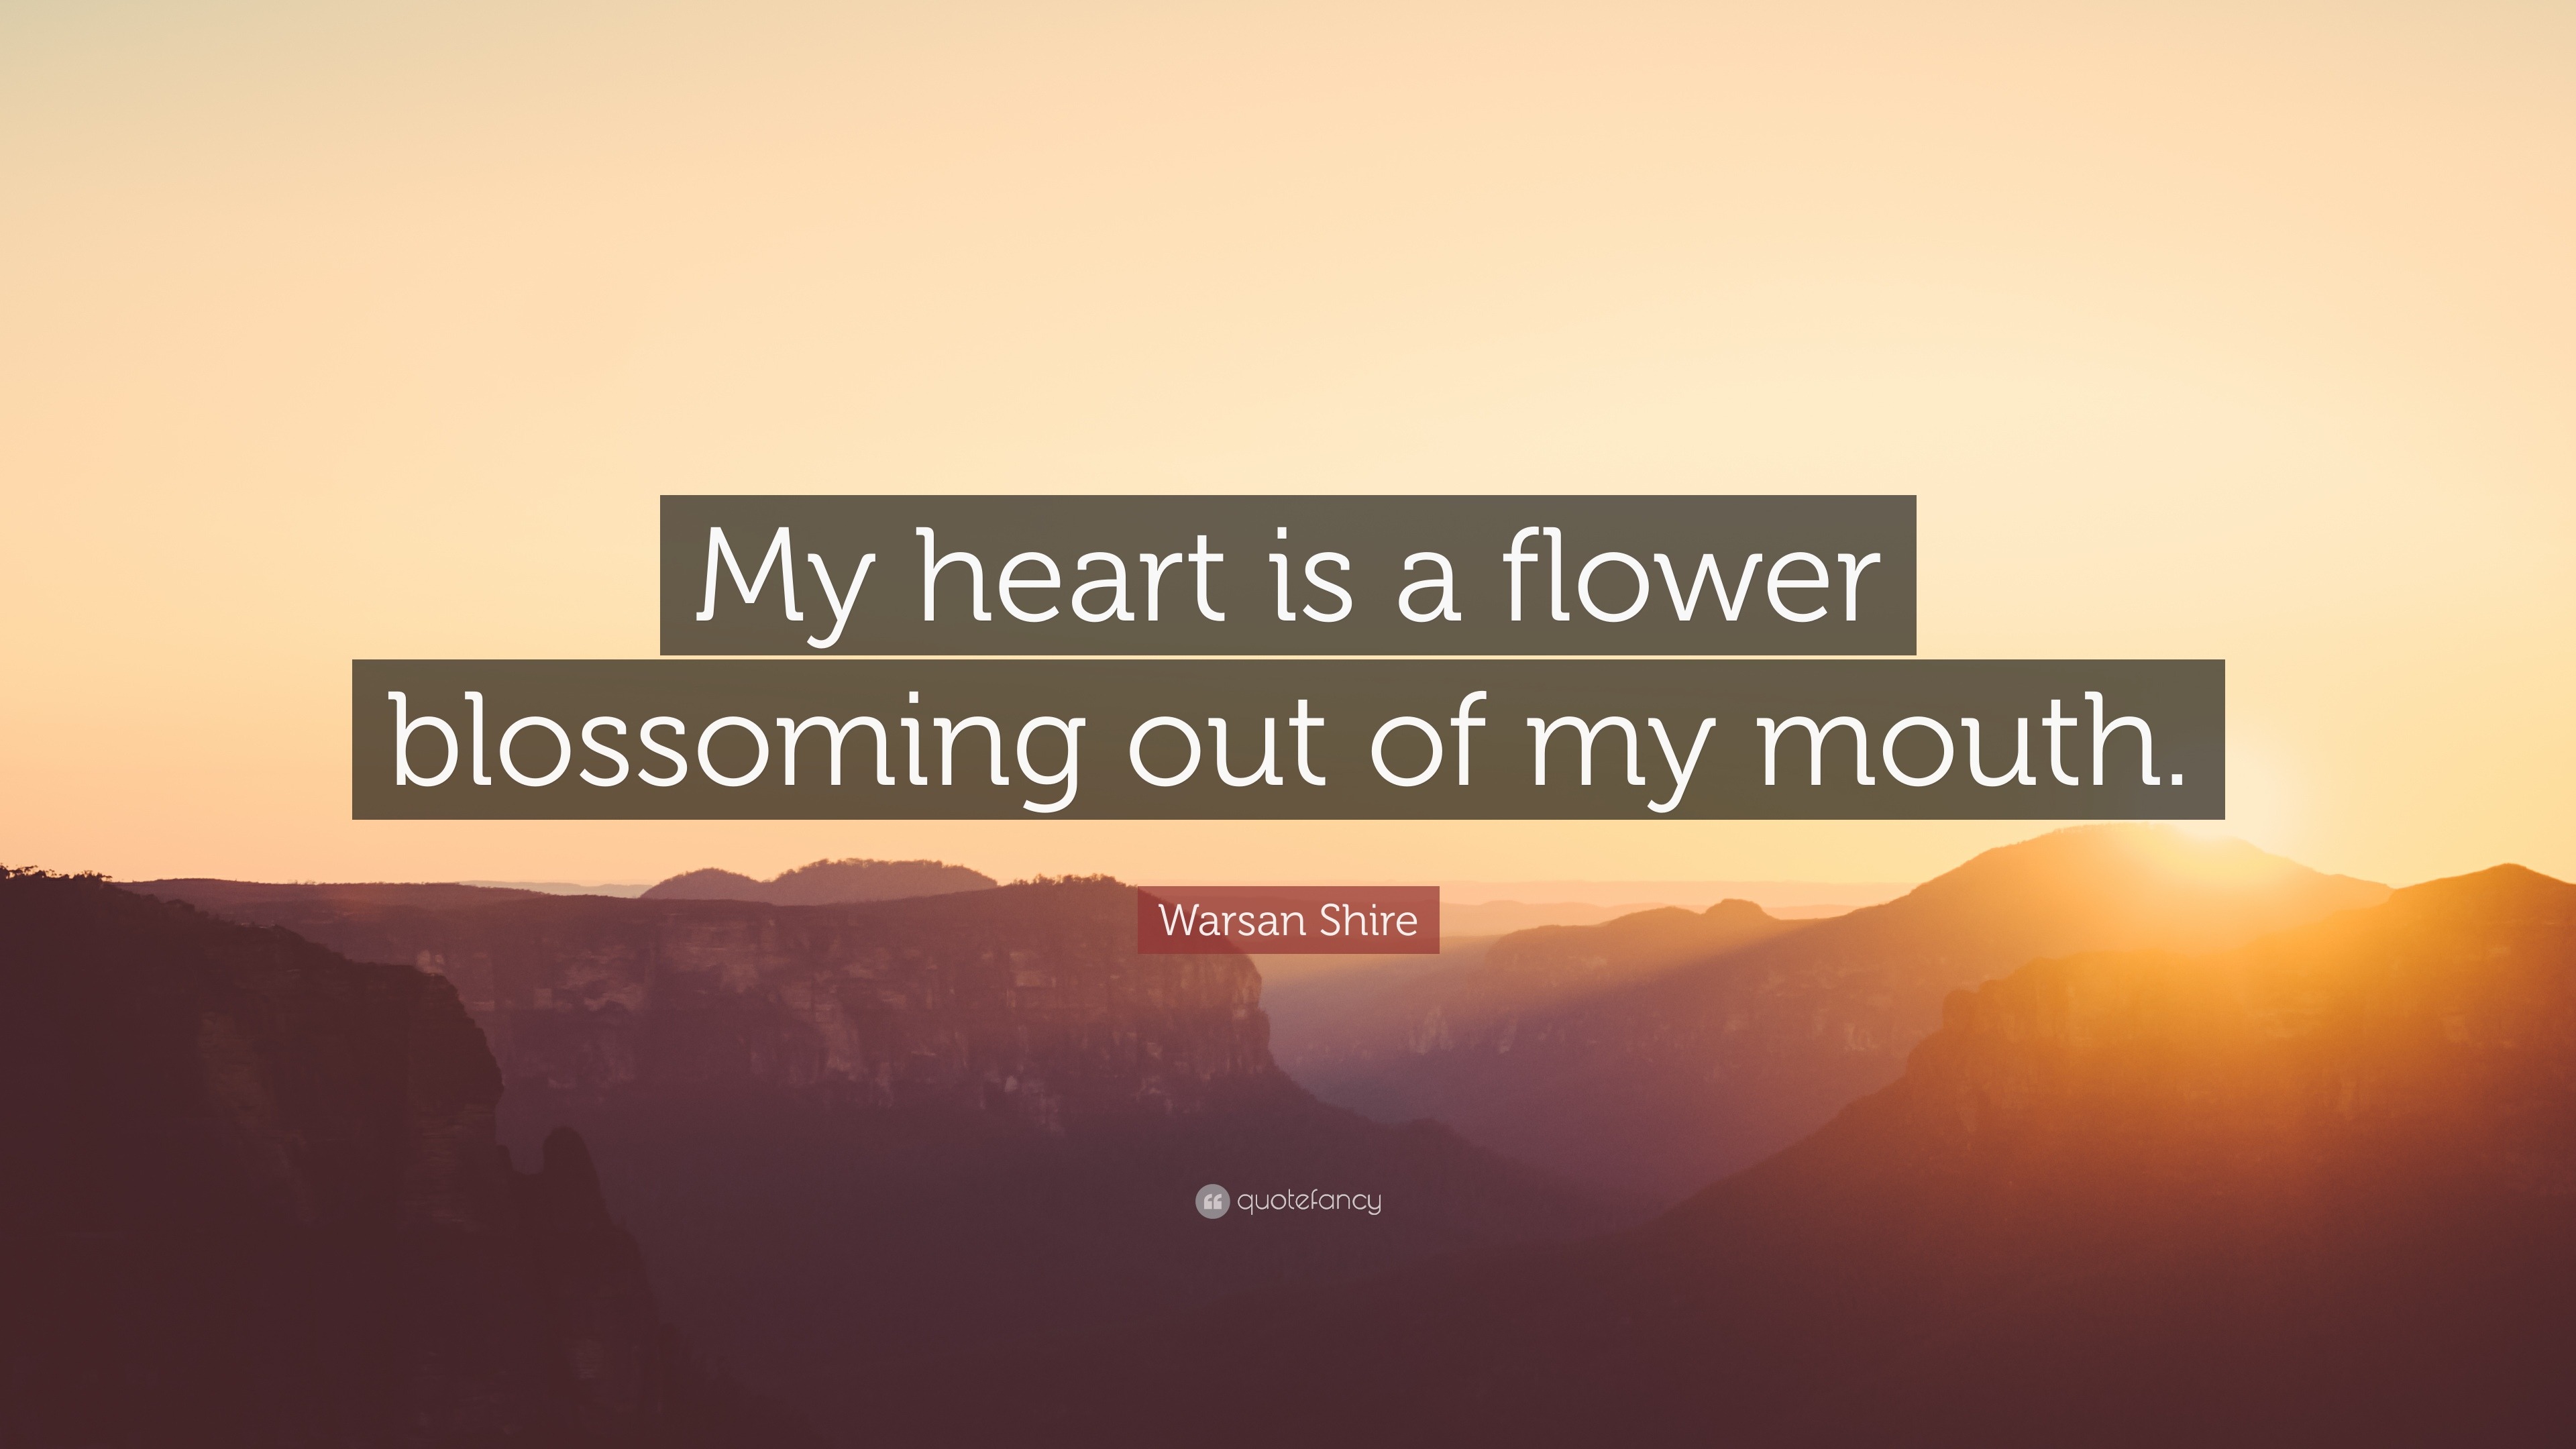 Warsan Shire Quote “My heart is a flower blossoming out of my mouth